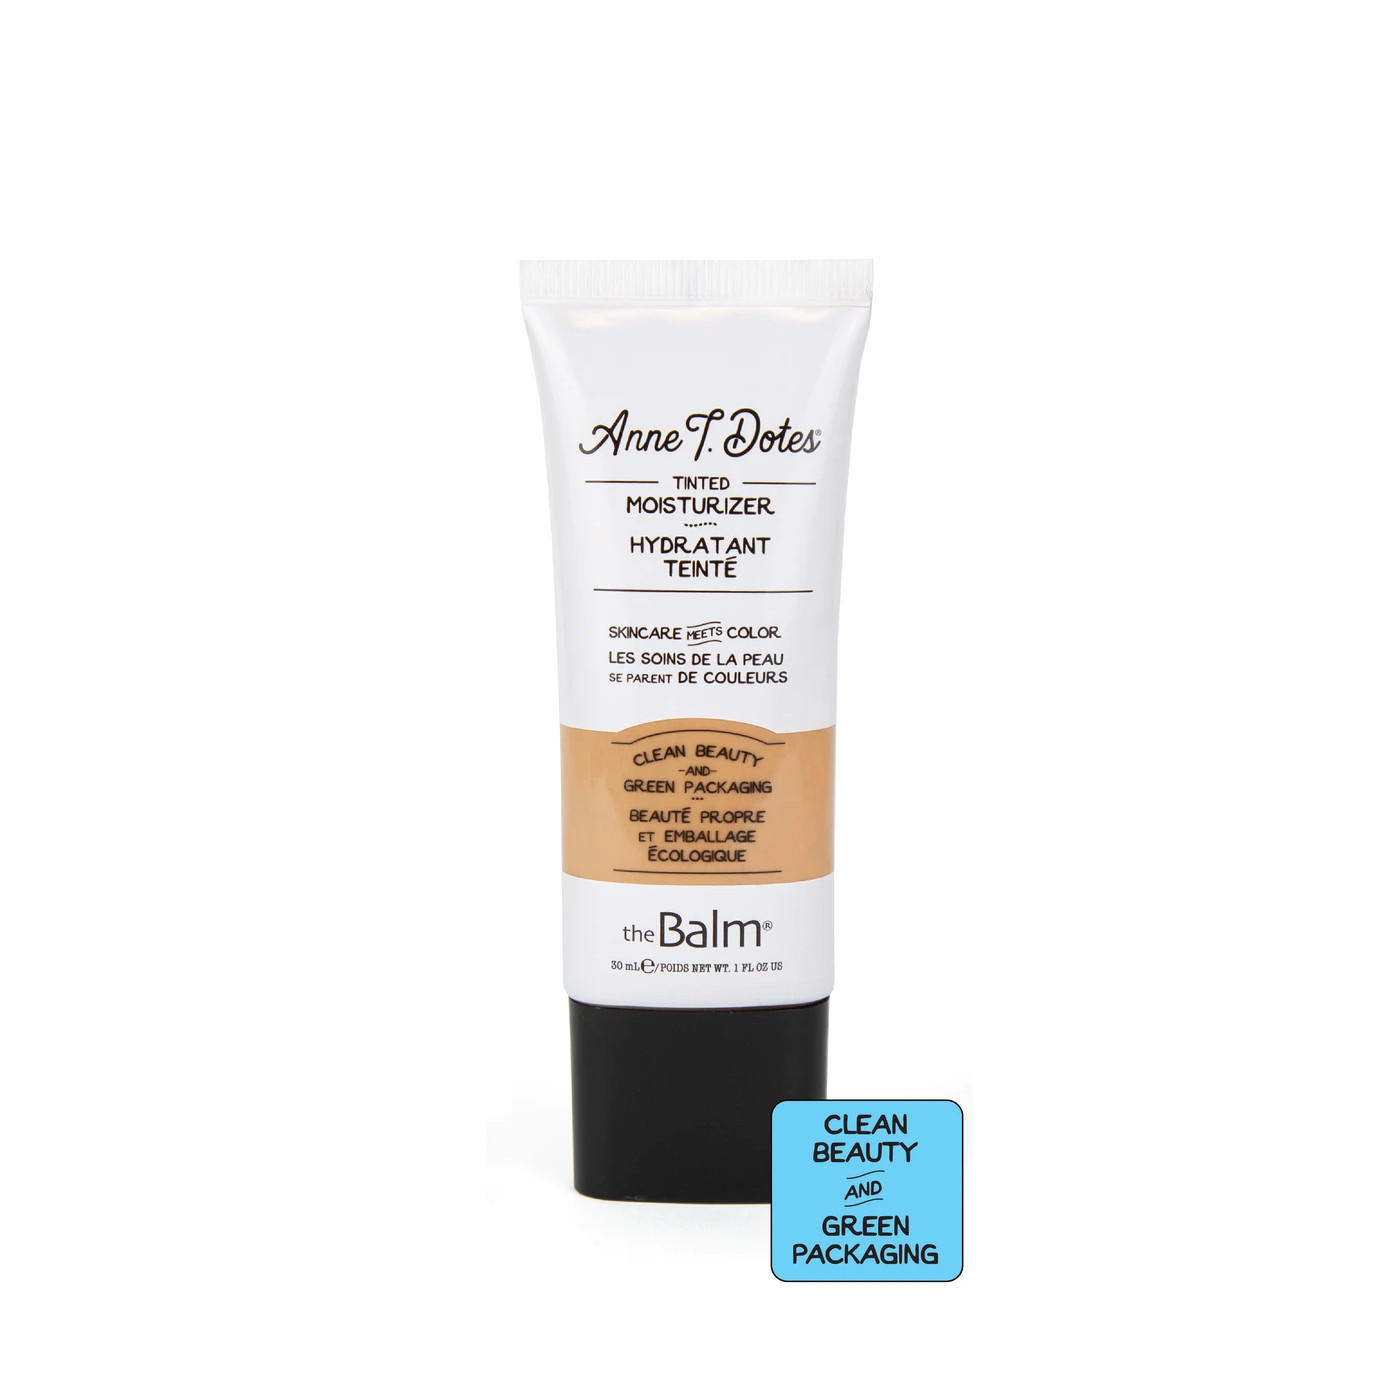 The Balm Anne T. Dotes Tinted Moisturizer #30